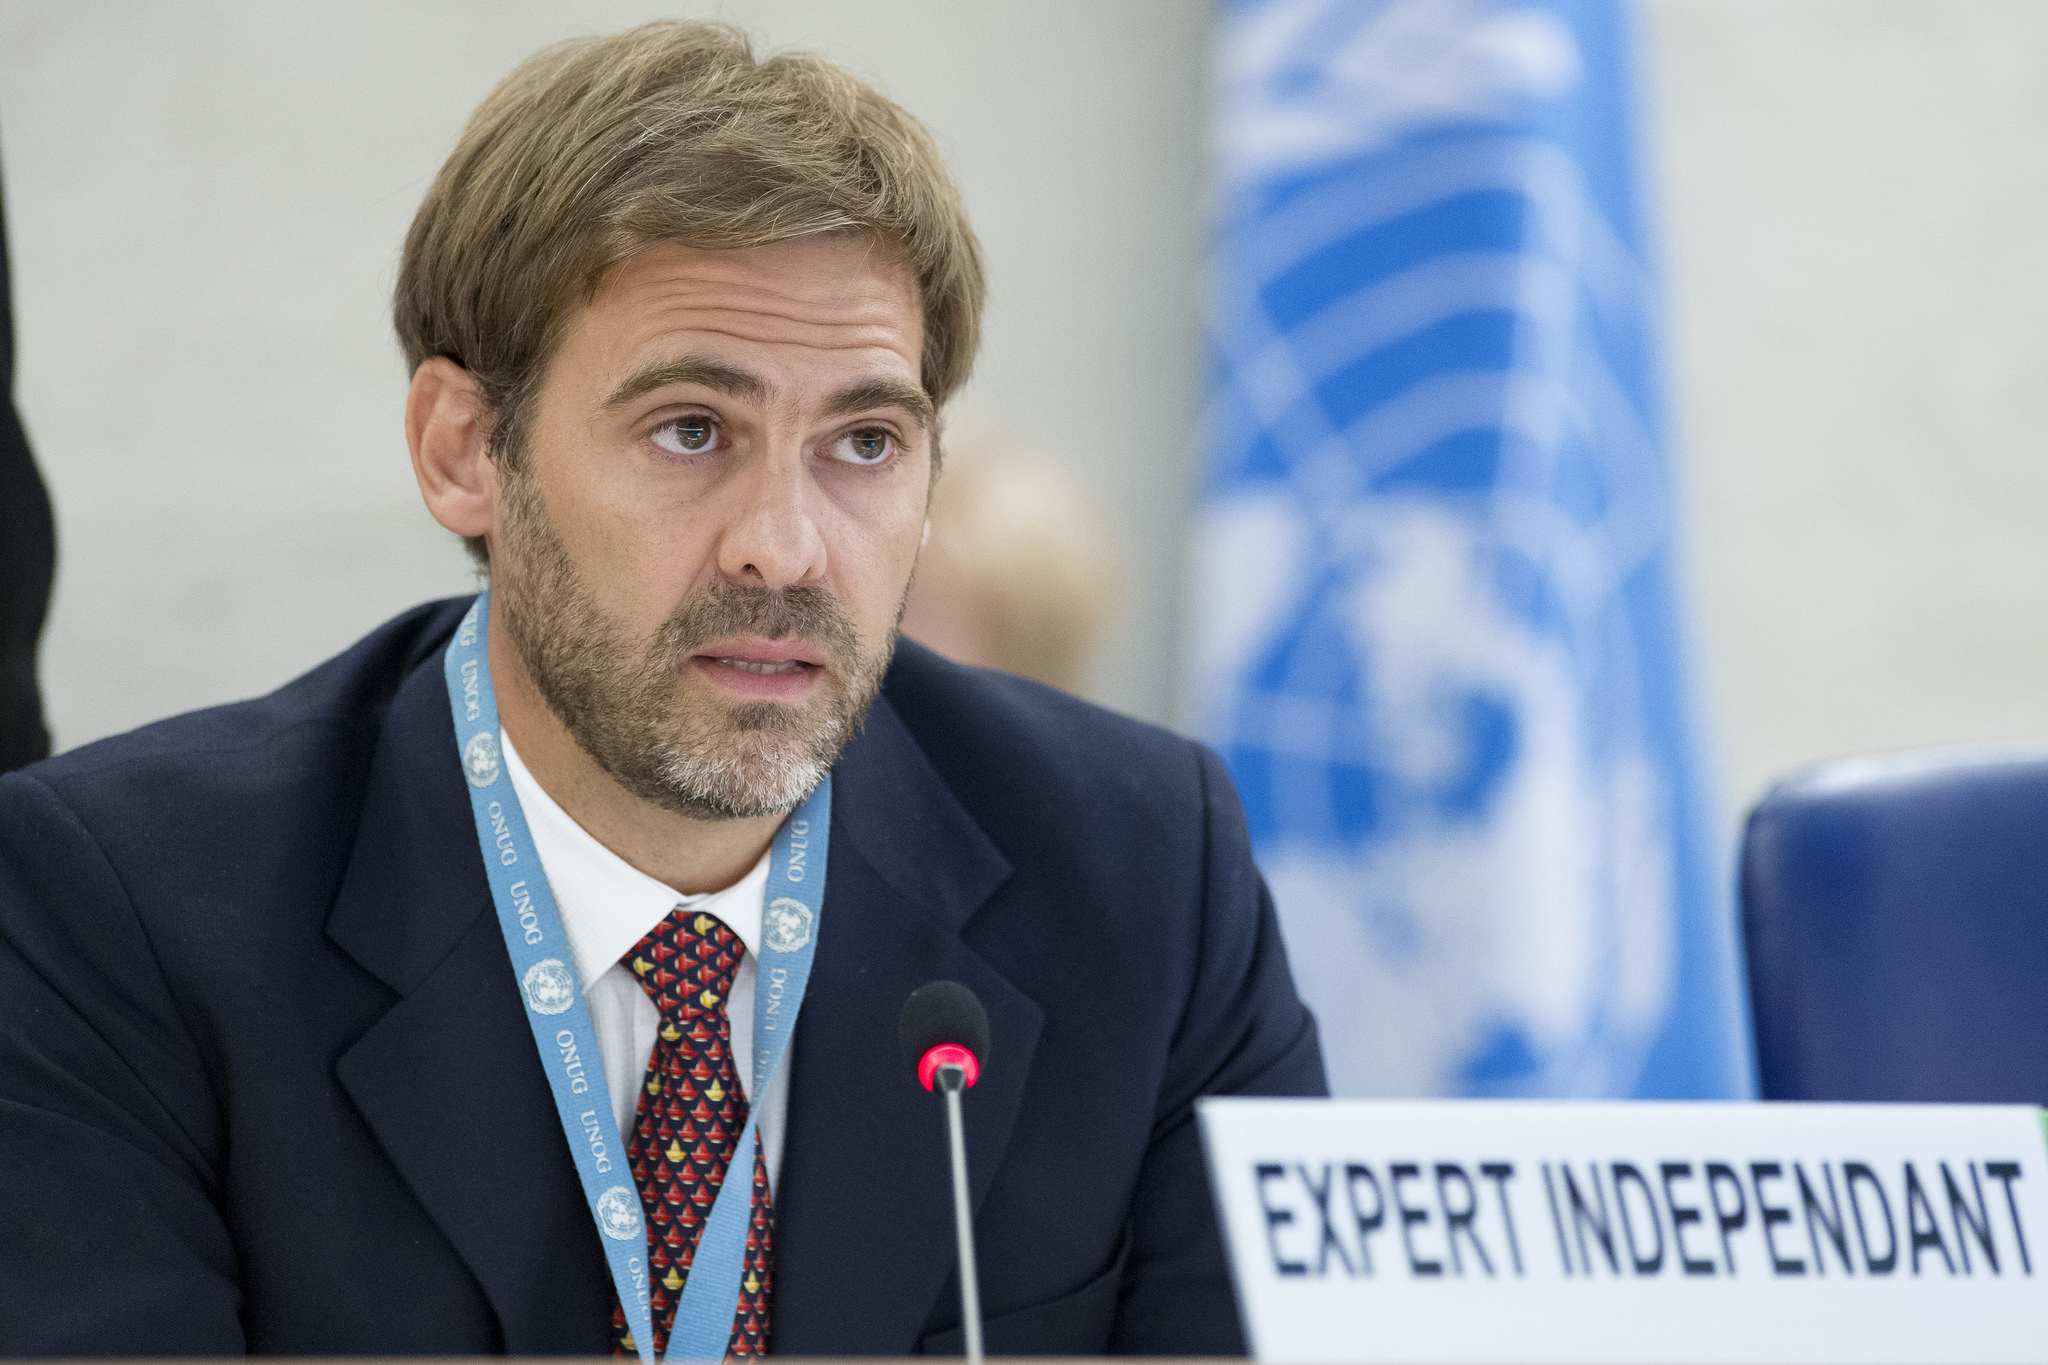 Juan Pablo Bohoslavsky, UN independent expert on foreign debt and human rights, was scheduled to come to Brazil in March to assess the impact of the amendment that capped spending. UN Photo / Jean-Marc Ferré